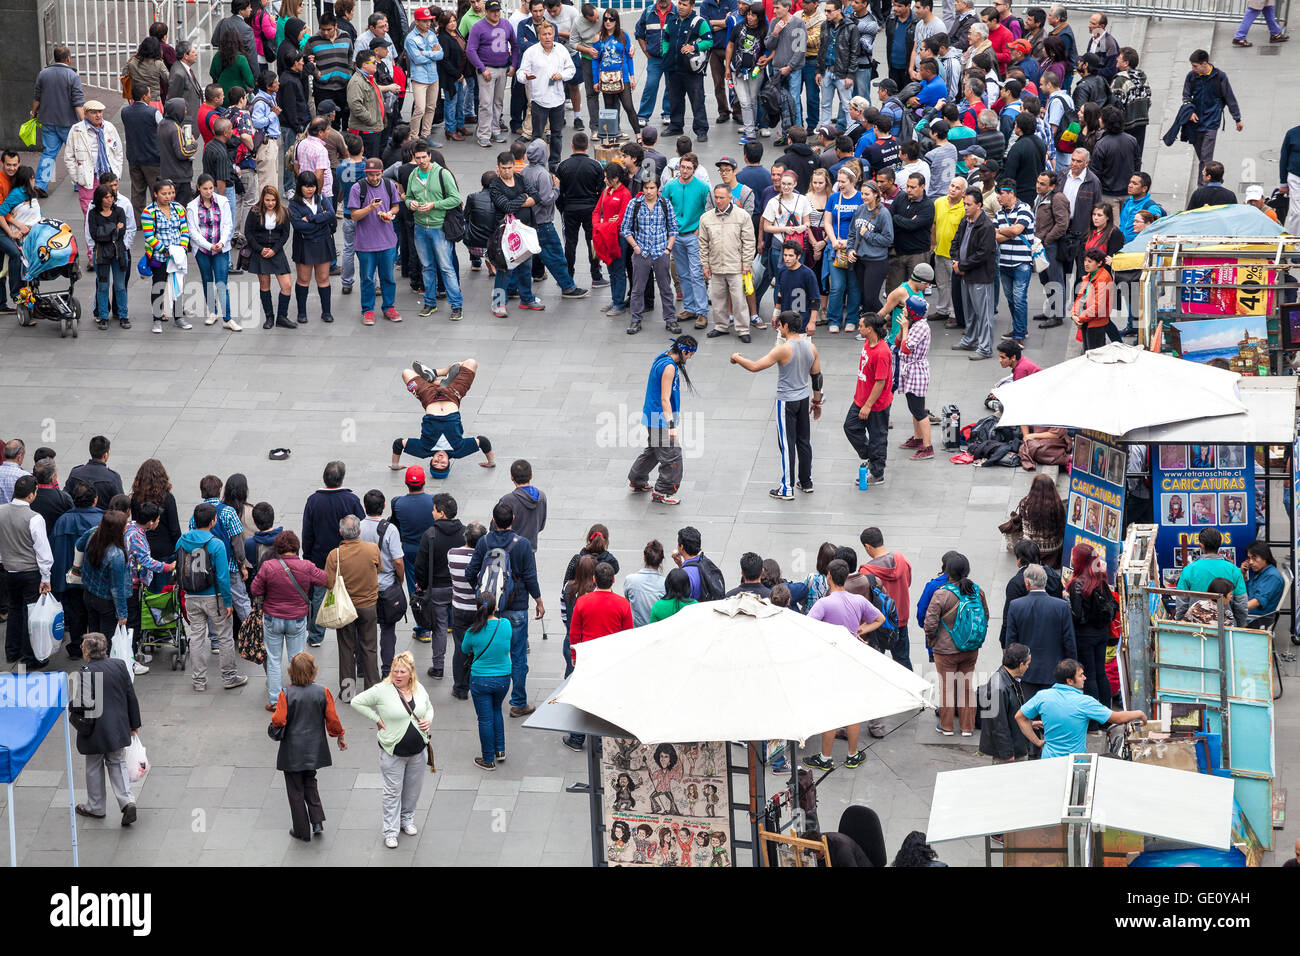 Street artists and people admiring modern dance in center of Santiage de Chile. Stock Photo